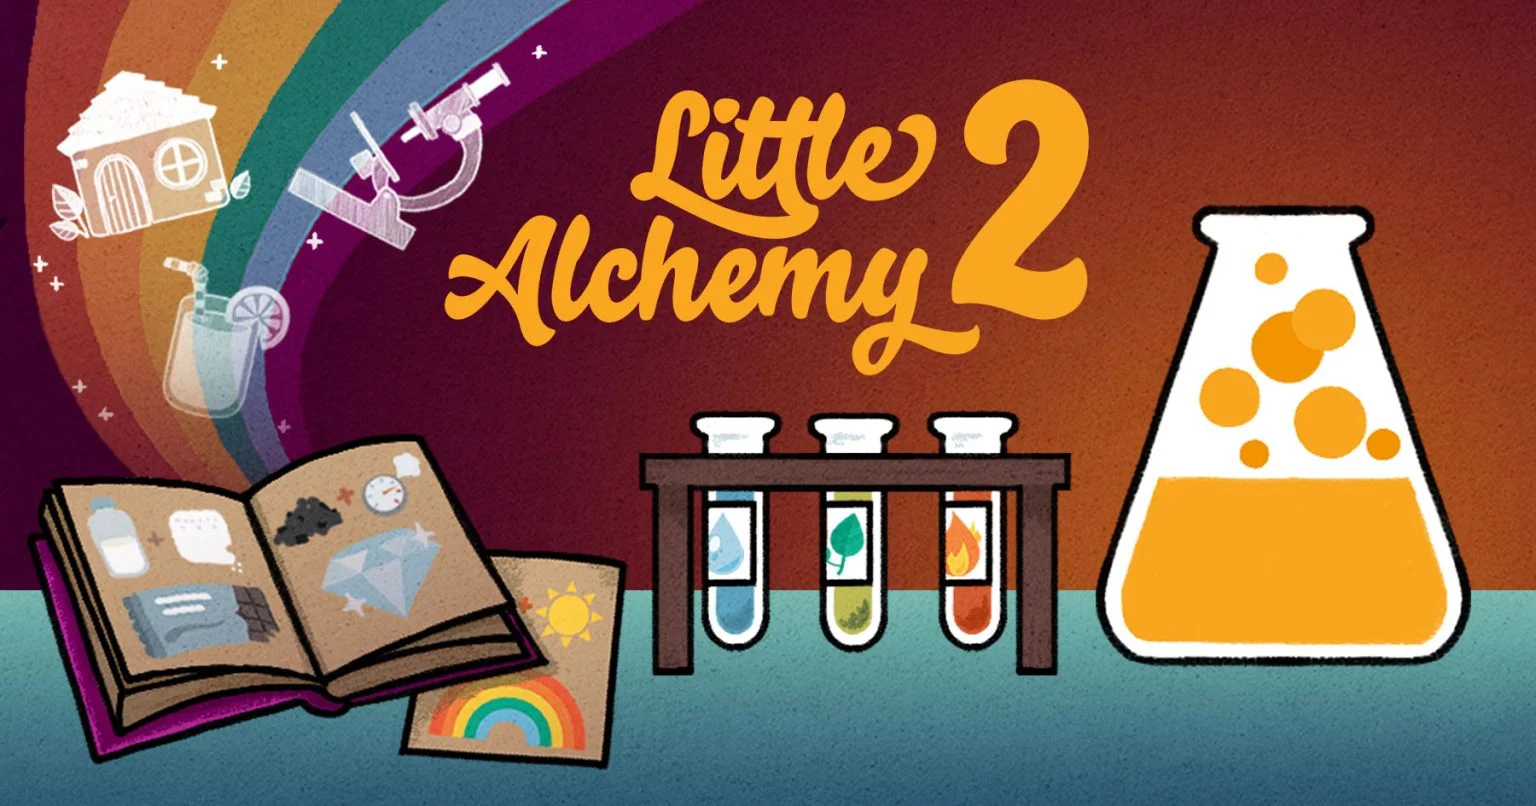 How to make beach in Little Alchemy 2?